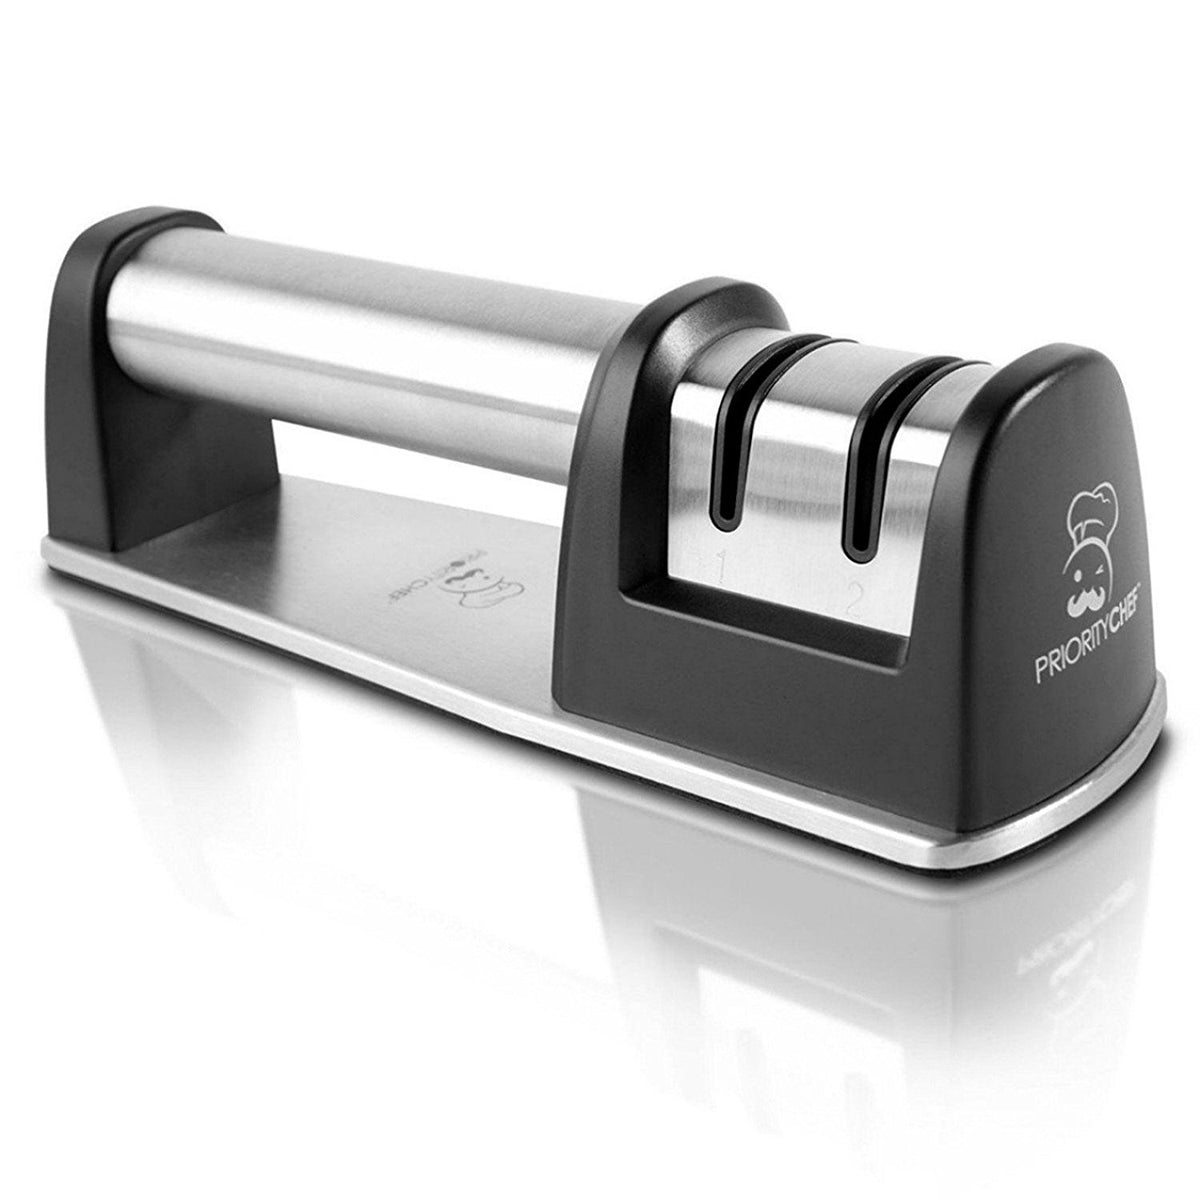 Chef Pro Electric Kitchen Knife Sharpener and Polishing System, Black-Silver